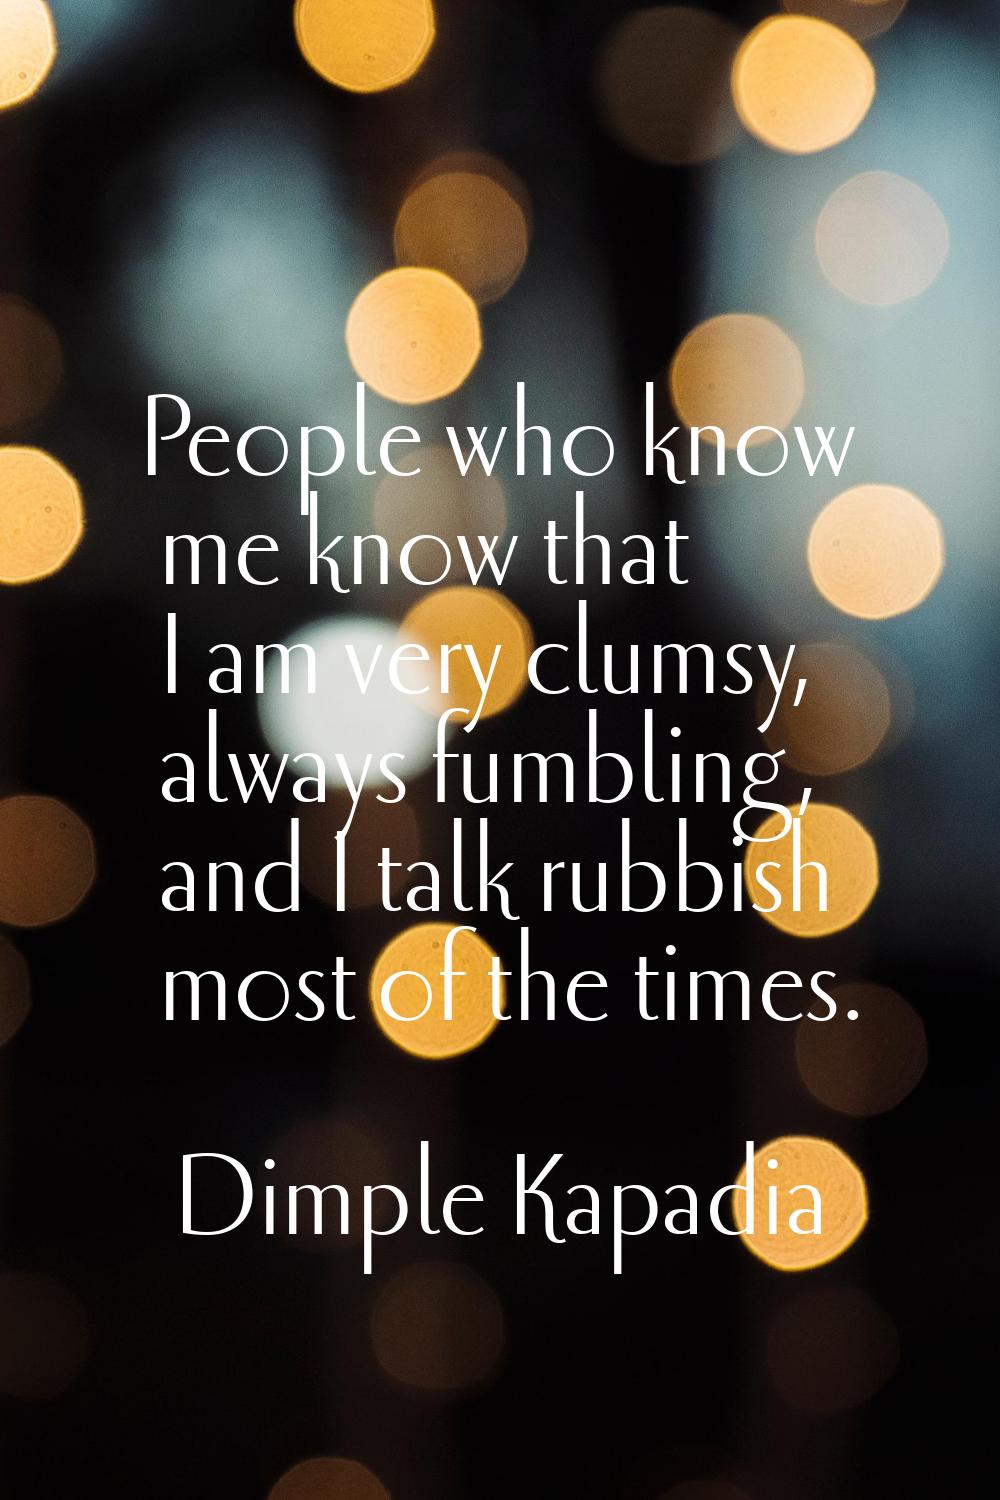 People who know me know that I am very clumsy, always fumbling, and I talk rubbish most of the time